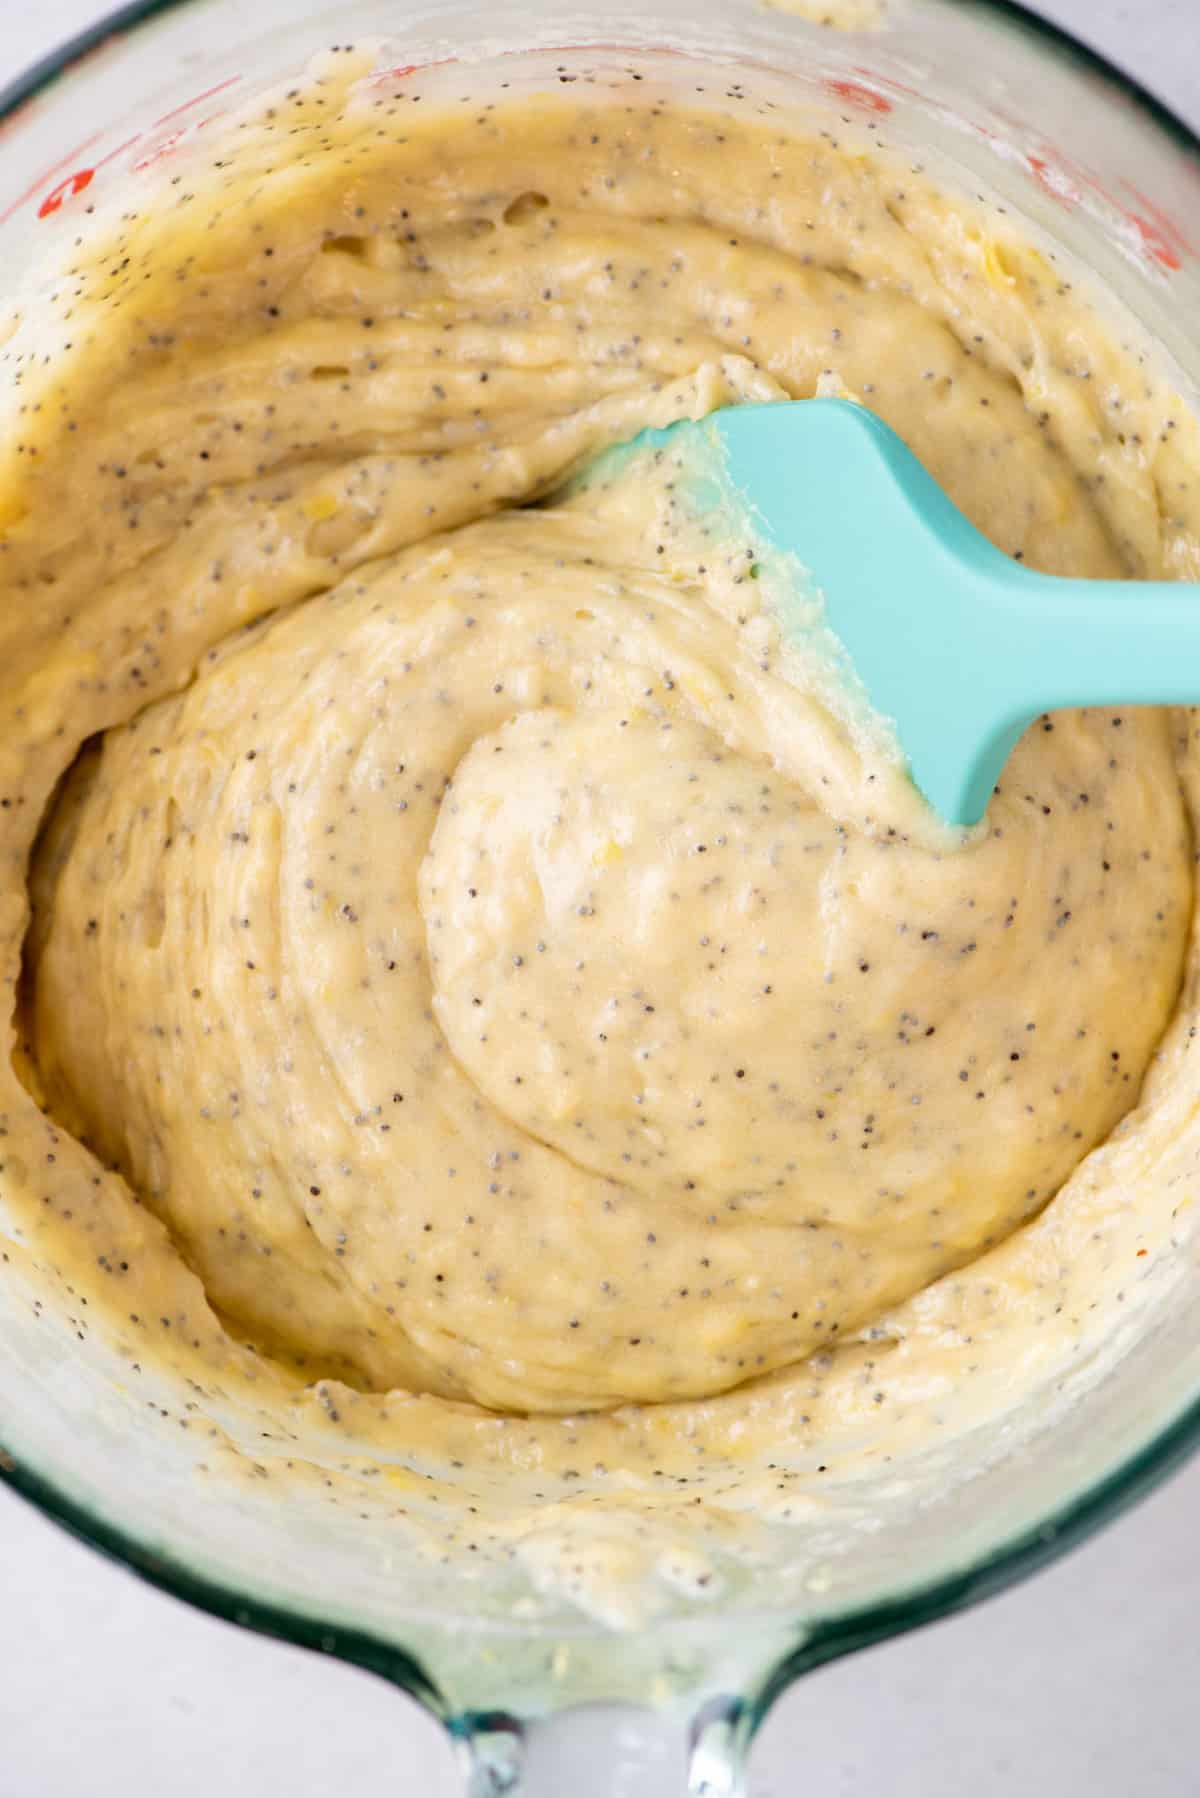 Lemon poppy seed batter in mixing bowl with rubber spatula